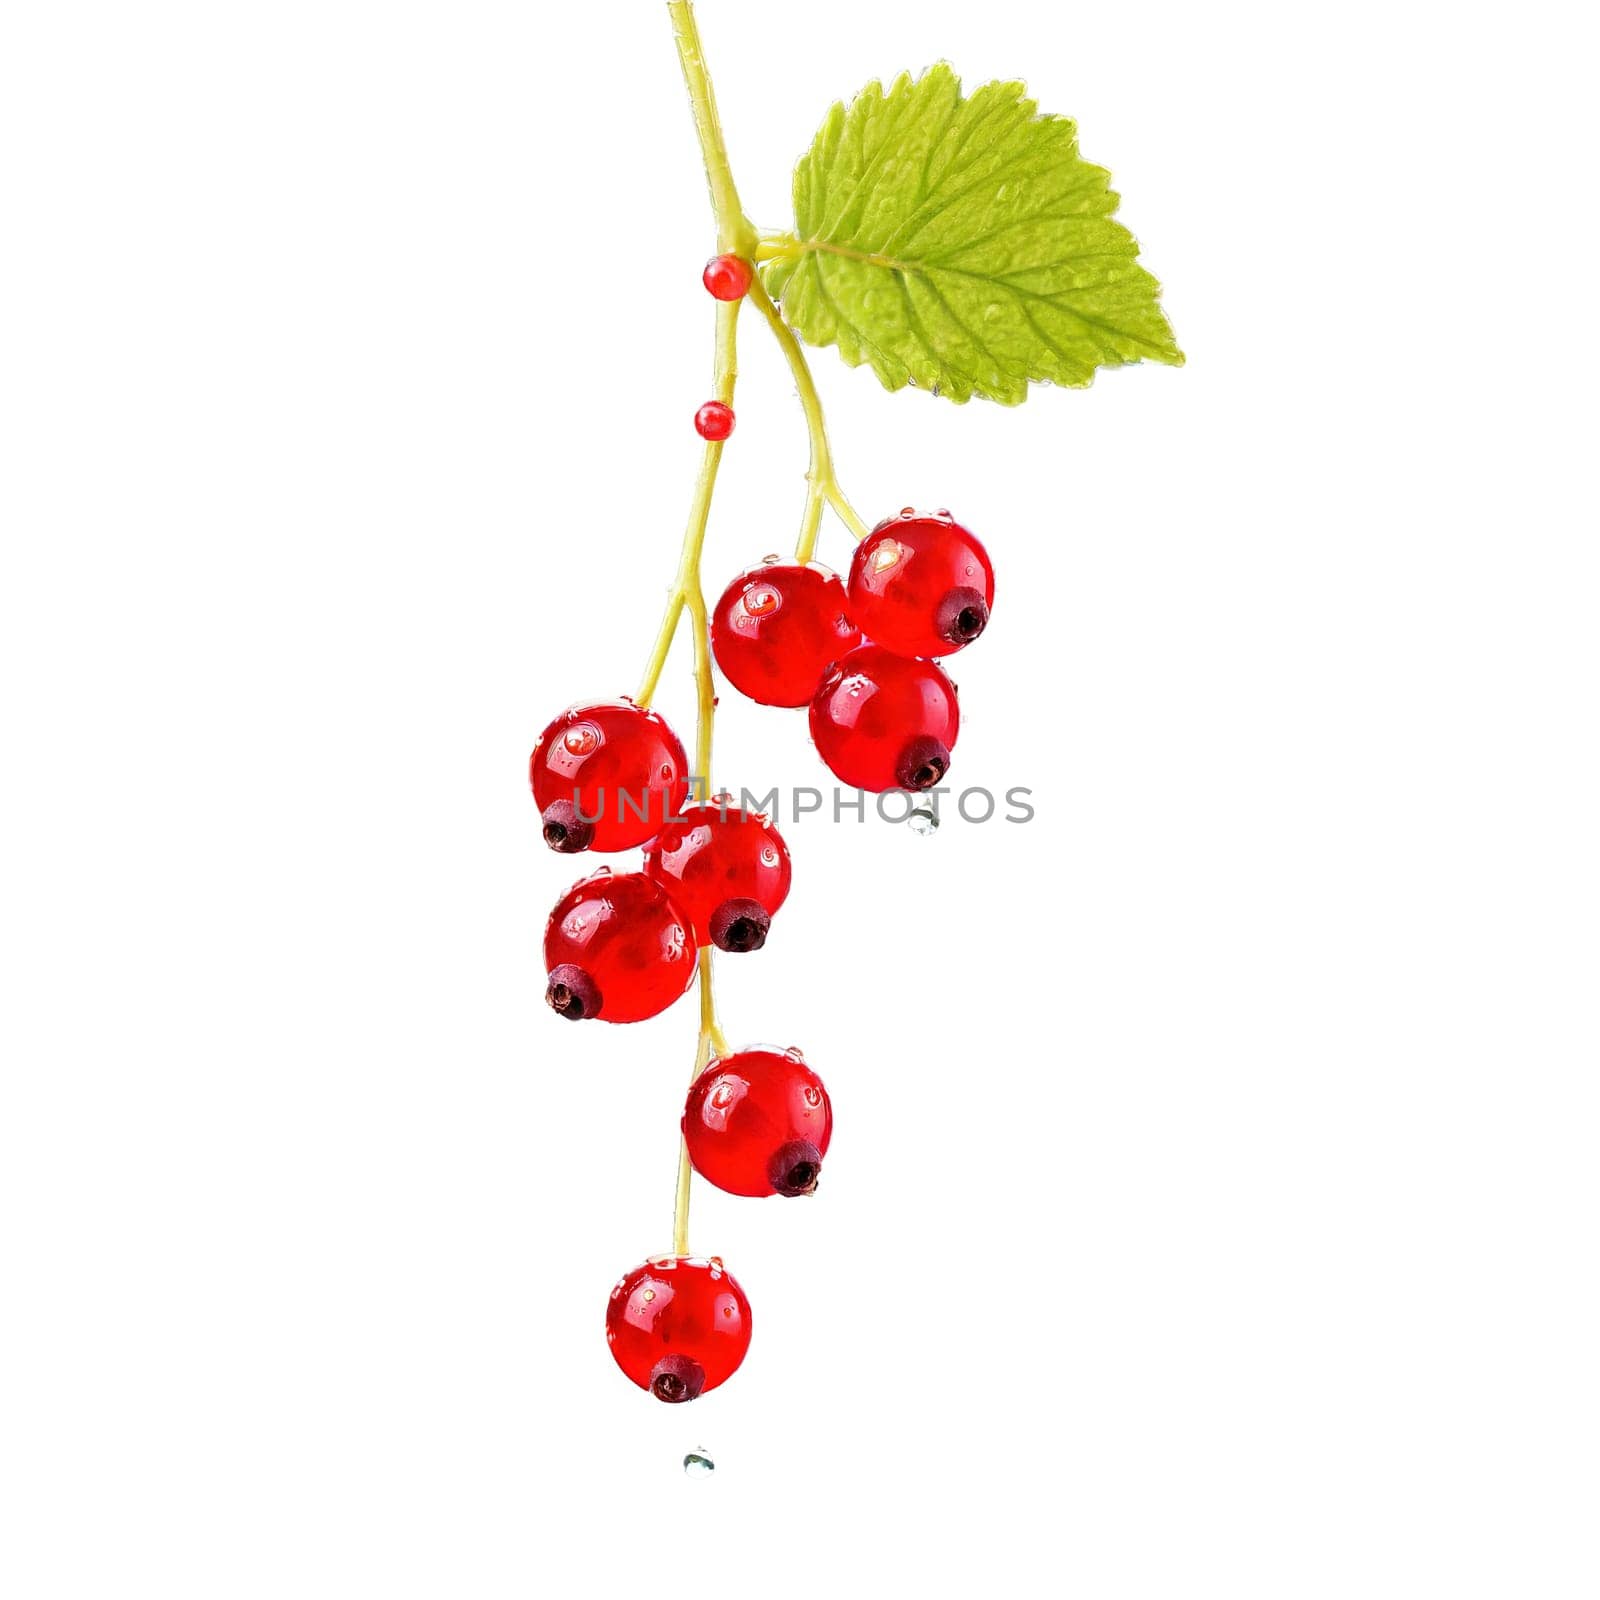 Vibrant red currants Ribes rubrum elegantly suspended from a delicate stem their translucent beauty captured by panophotograph